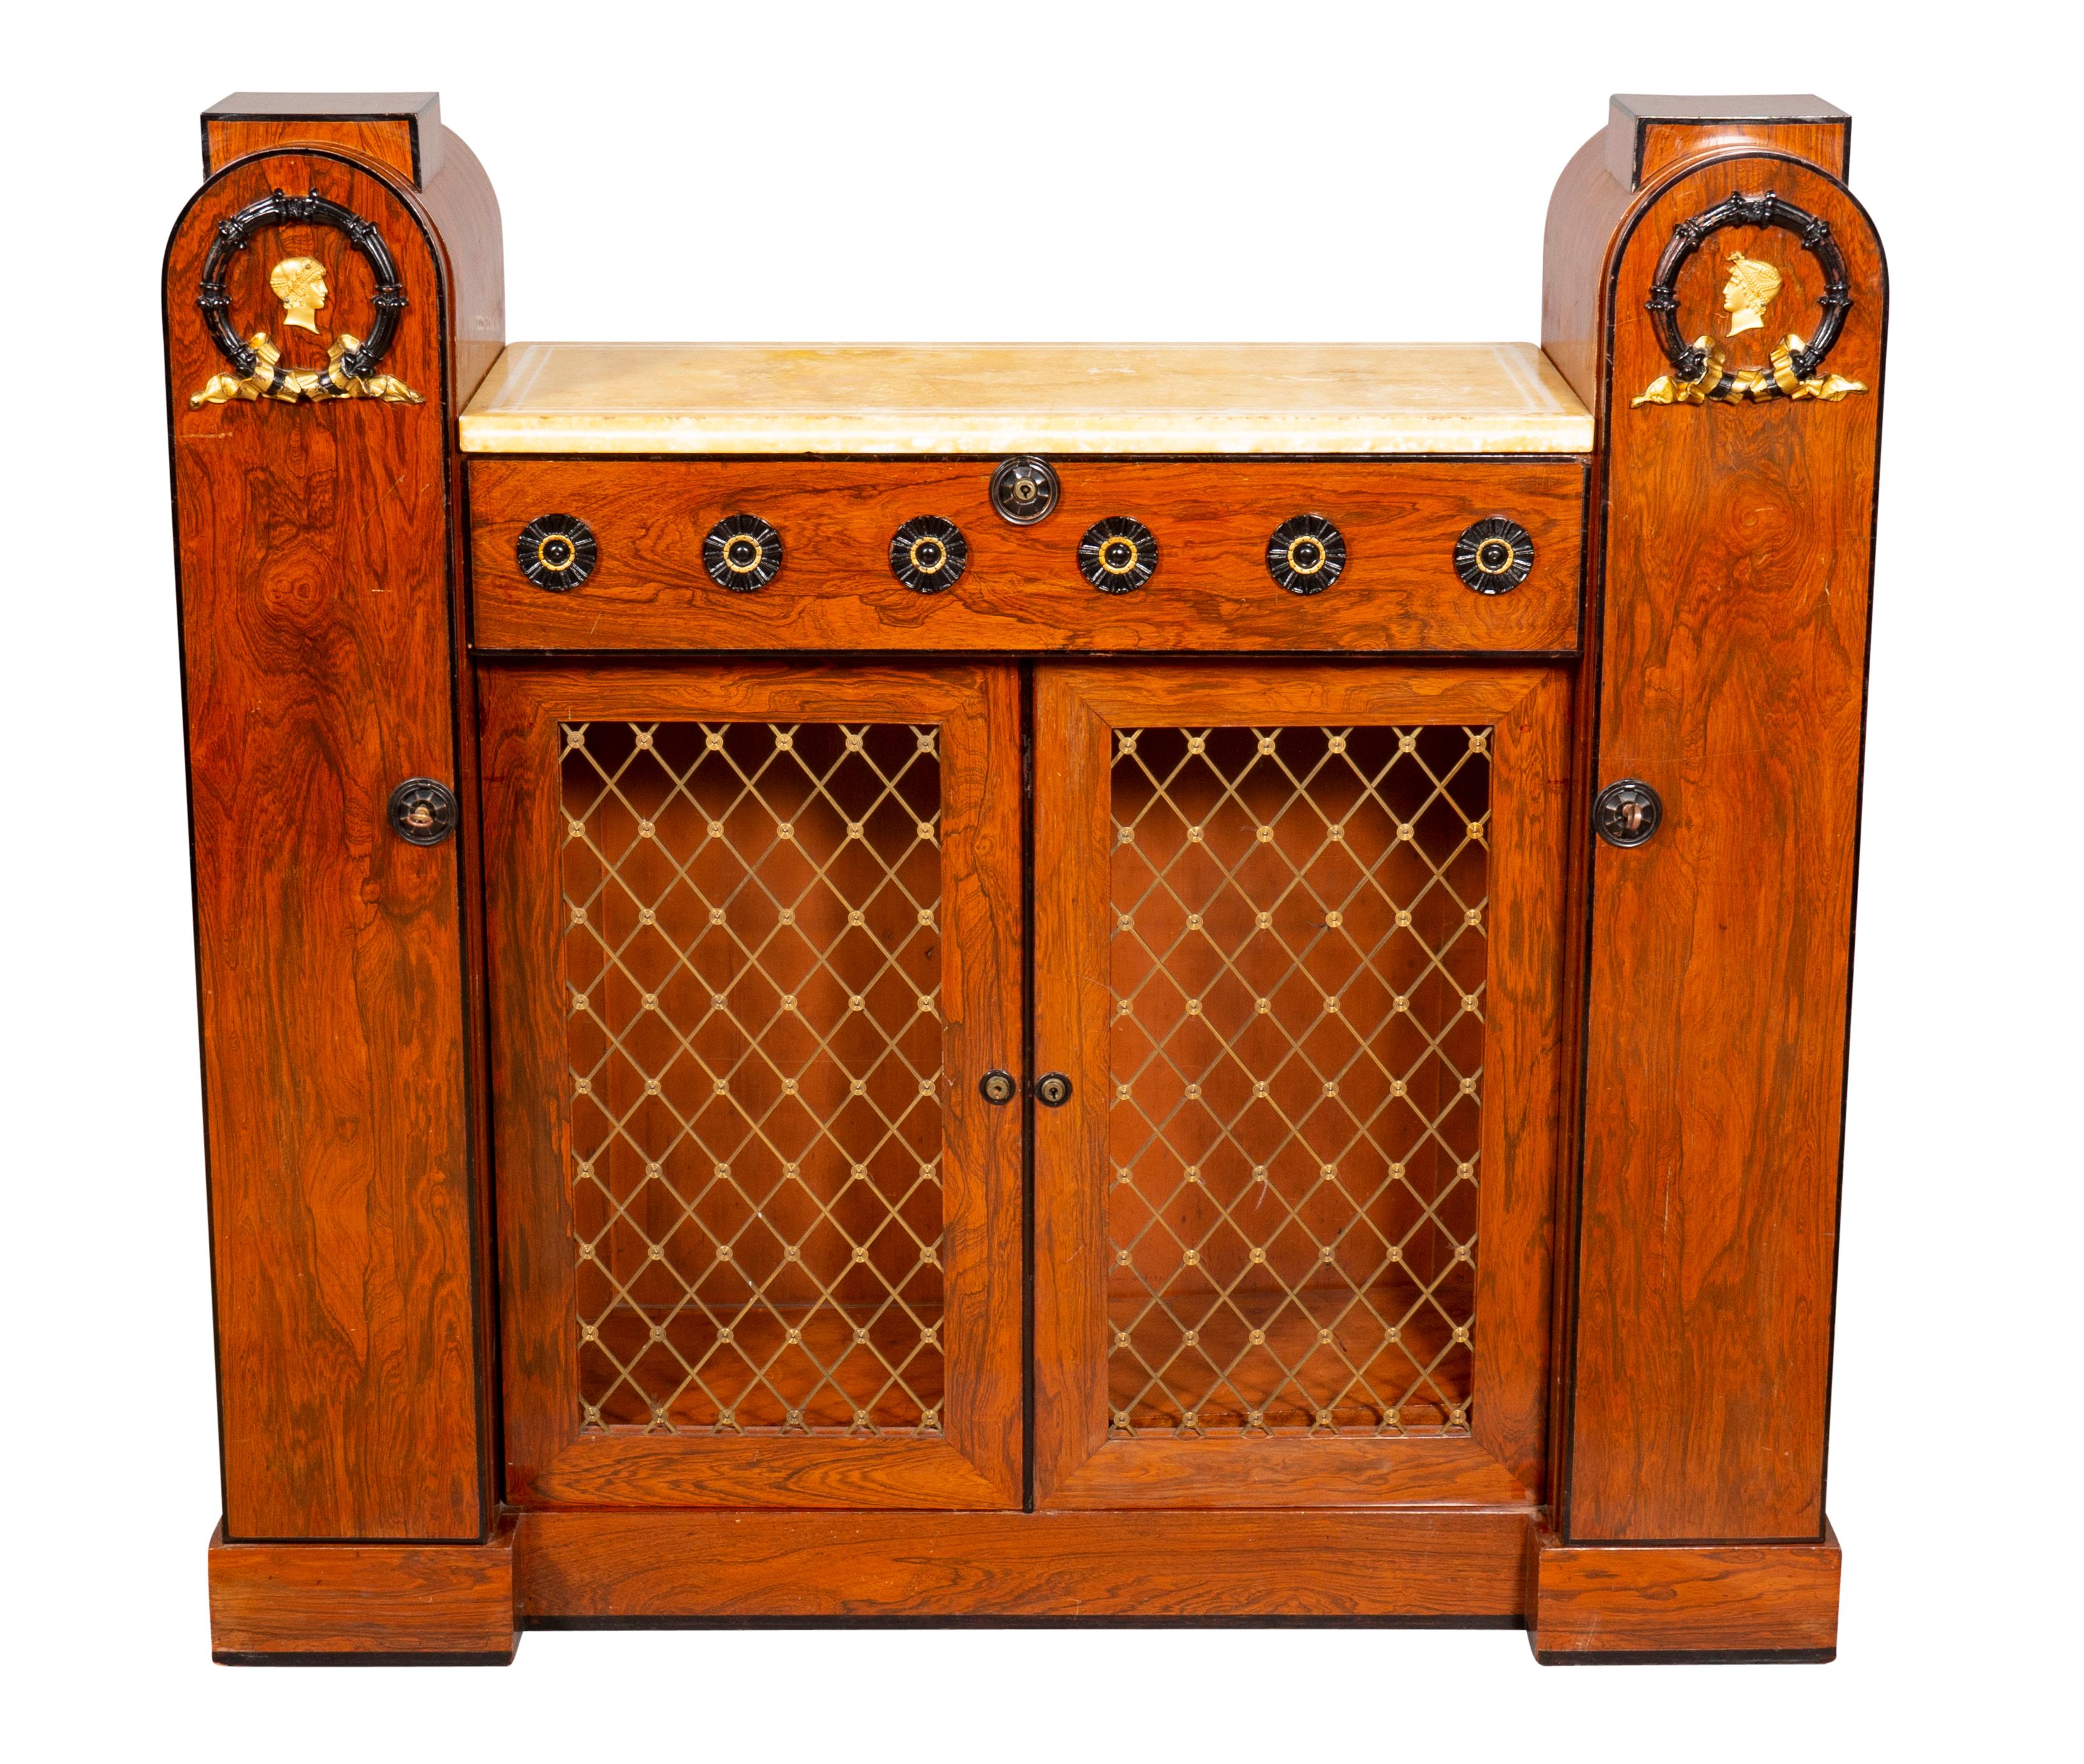 Unusual form originally having a backboard. With marble top with raised arched ends with bronze wreaths and mask over a long drawer and pair of grill doors flanked by cabinet doors. Plinth base.